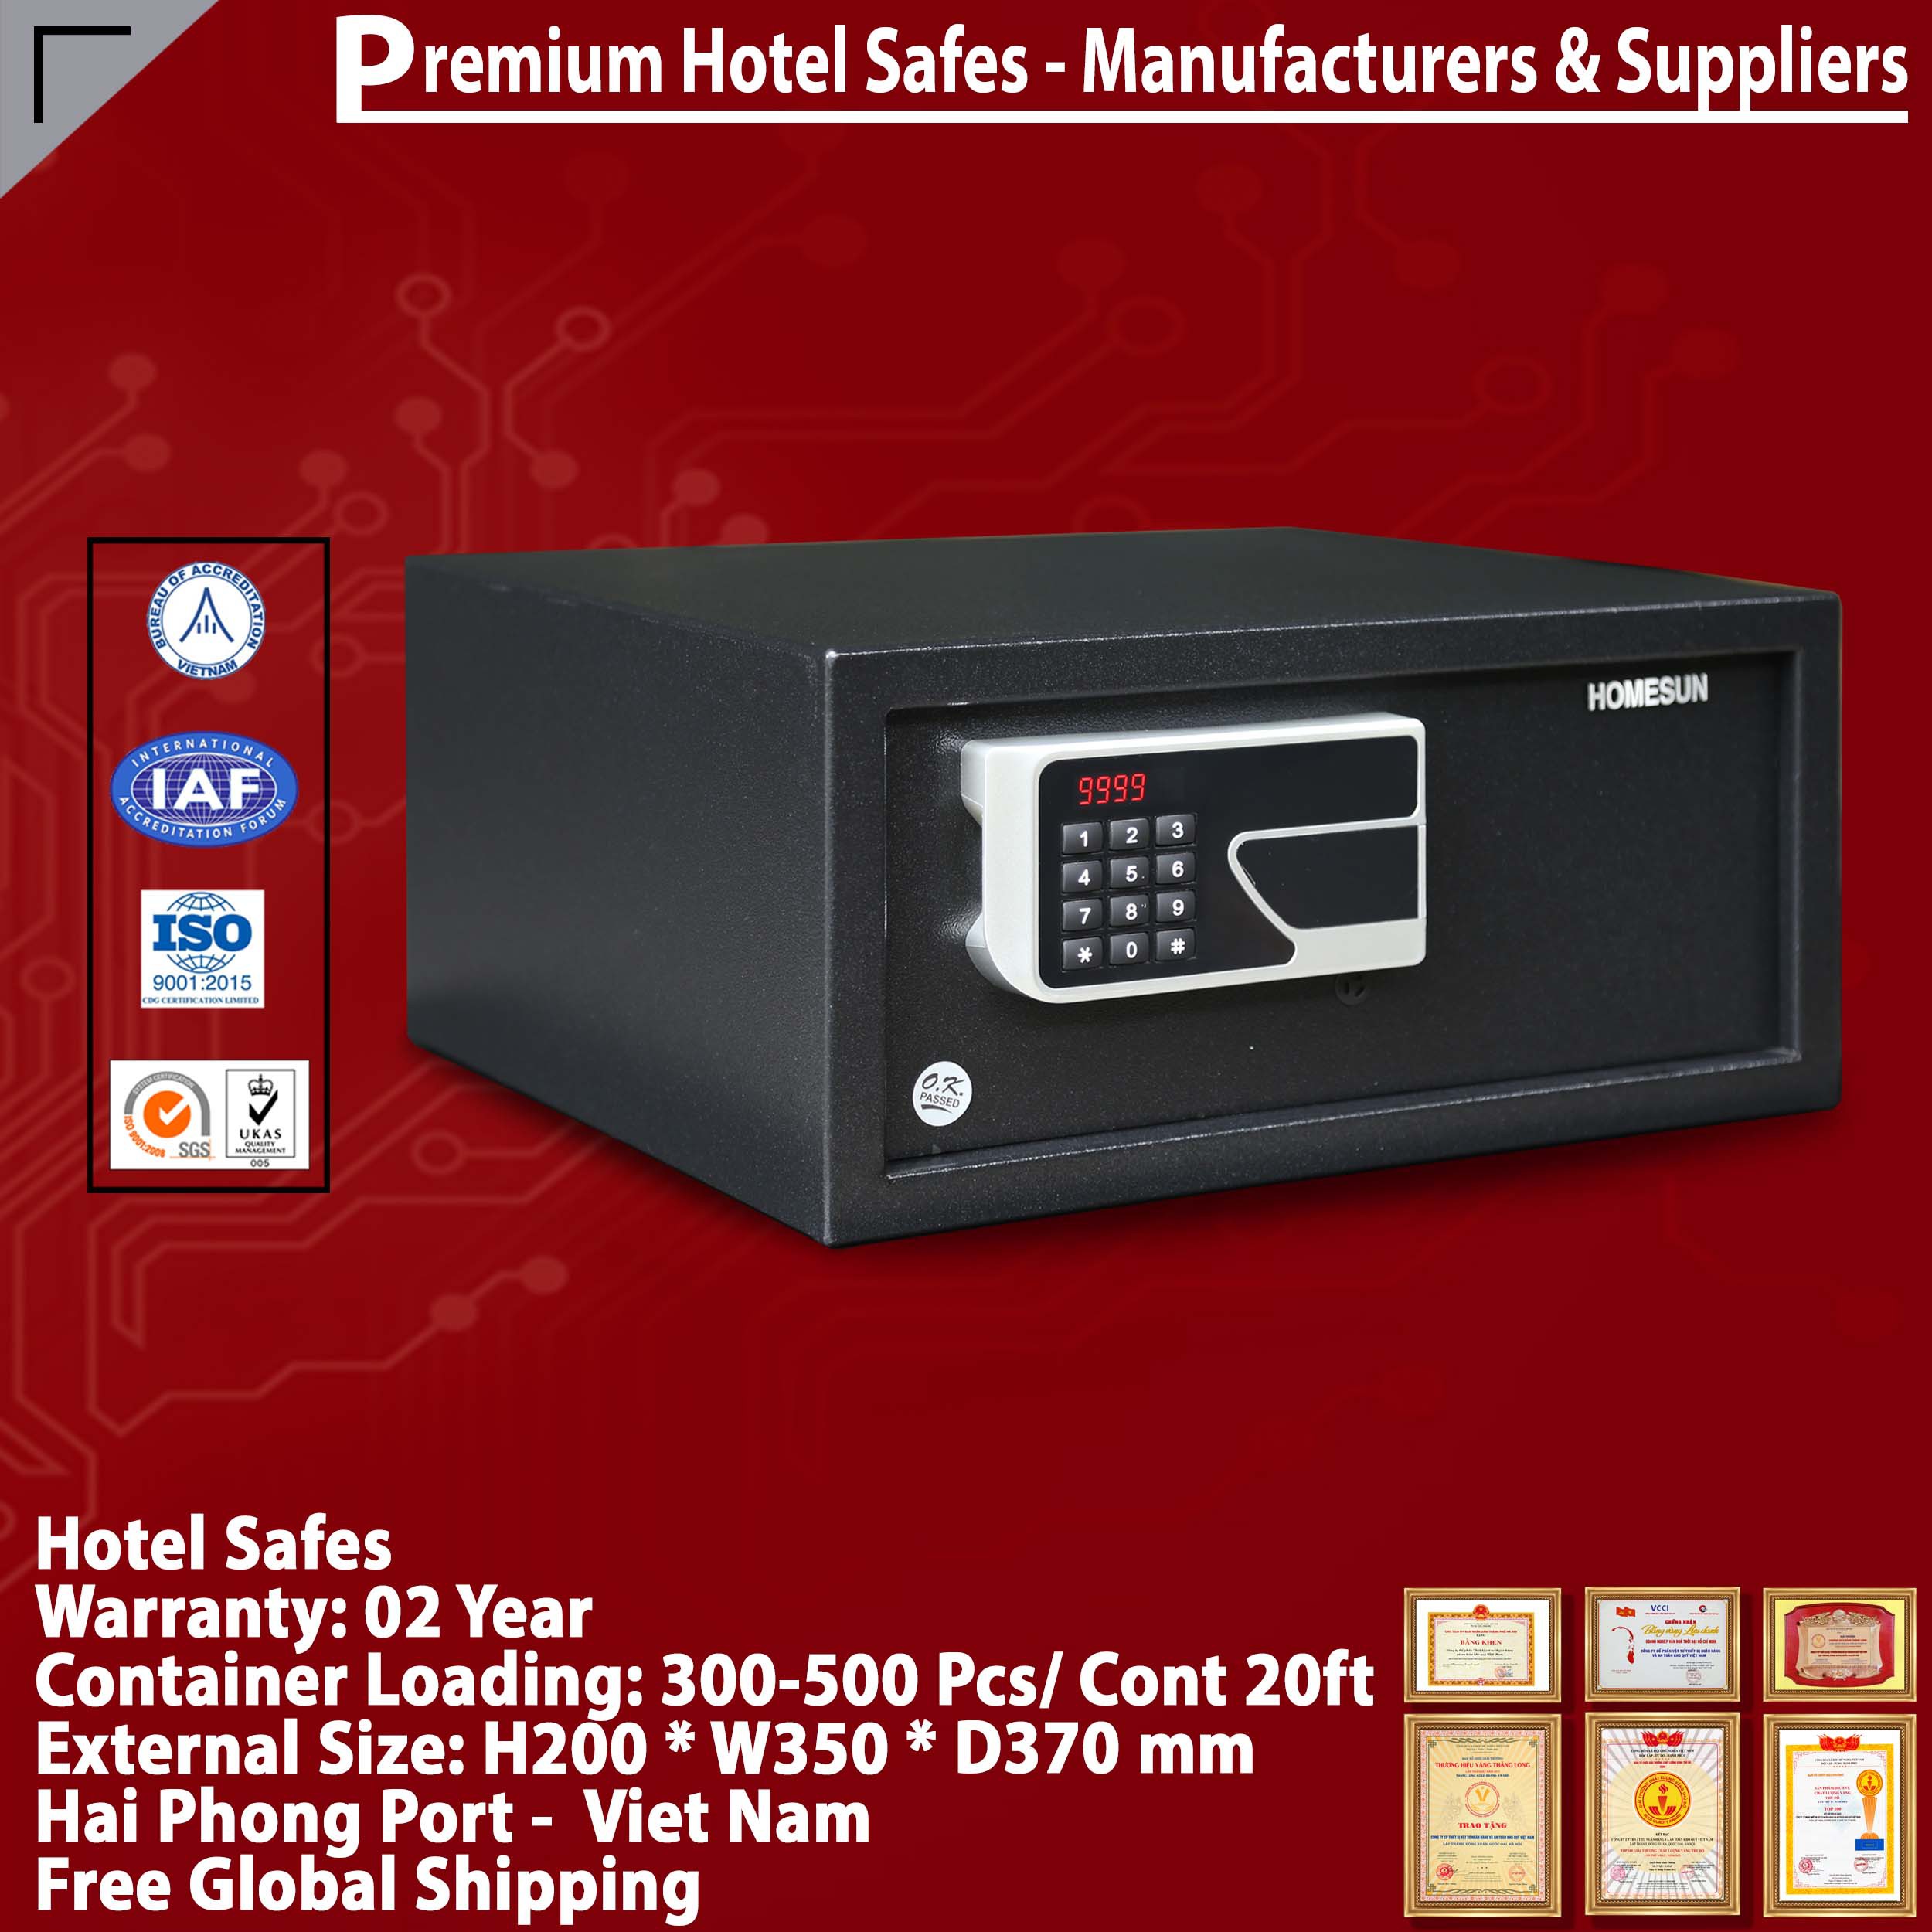 Best Sellers In Hotel Safes Manufacturing Facilit WELKO